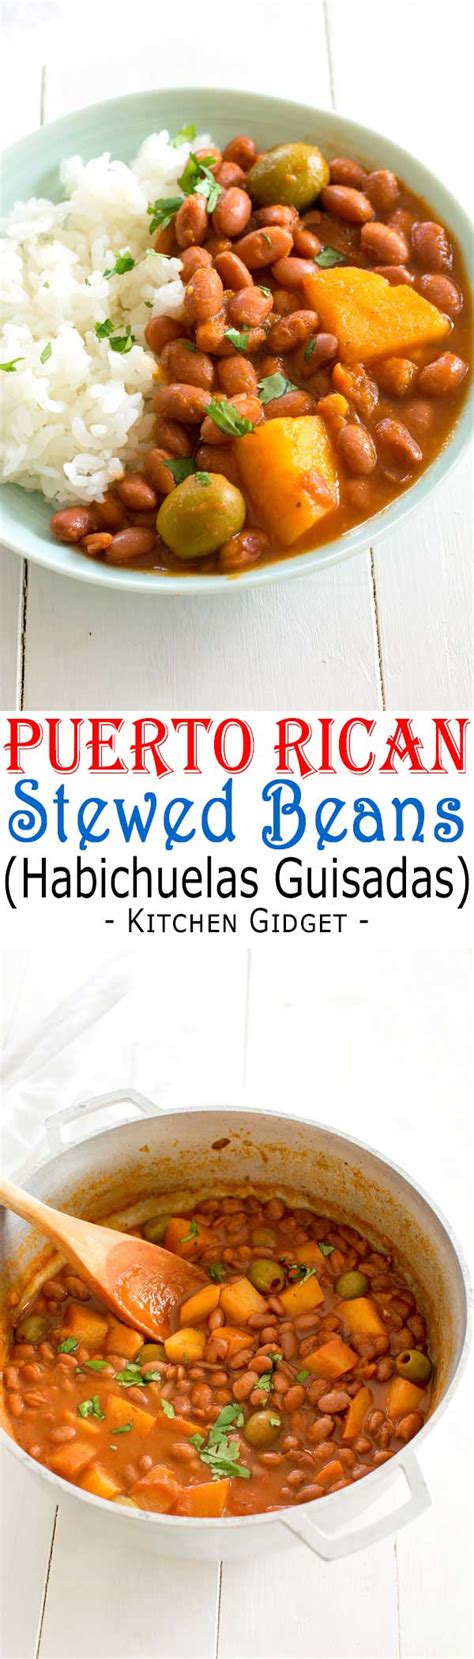 Sometimes the greatest surprises come in the smallest ingredients like coconut, plantains, okra, guandules or pigeon peas, tamarind and much more arroz mamposteao: Puerto Rican Rice and Beans (Habichuelas Guisadas ...